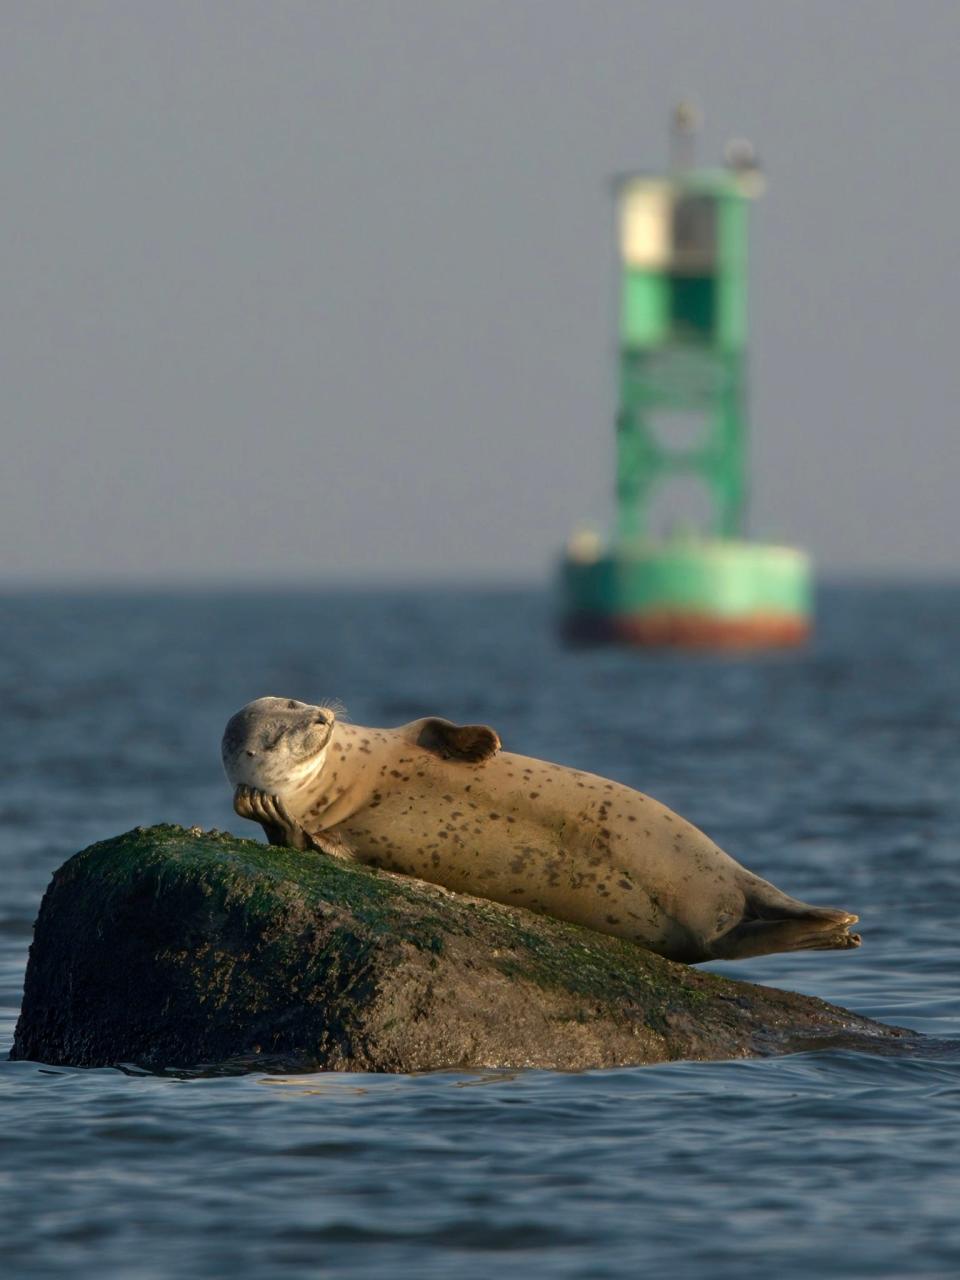 Title: Living the Moment Description: A seal is seen lying on its side near Staten Island, New York.